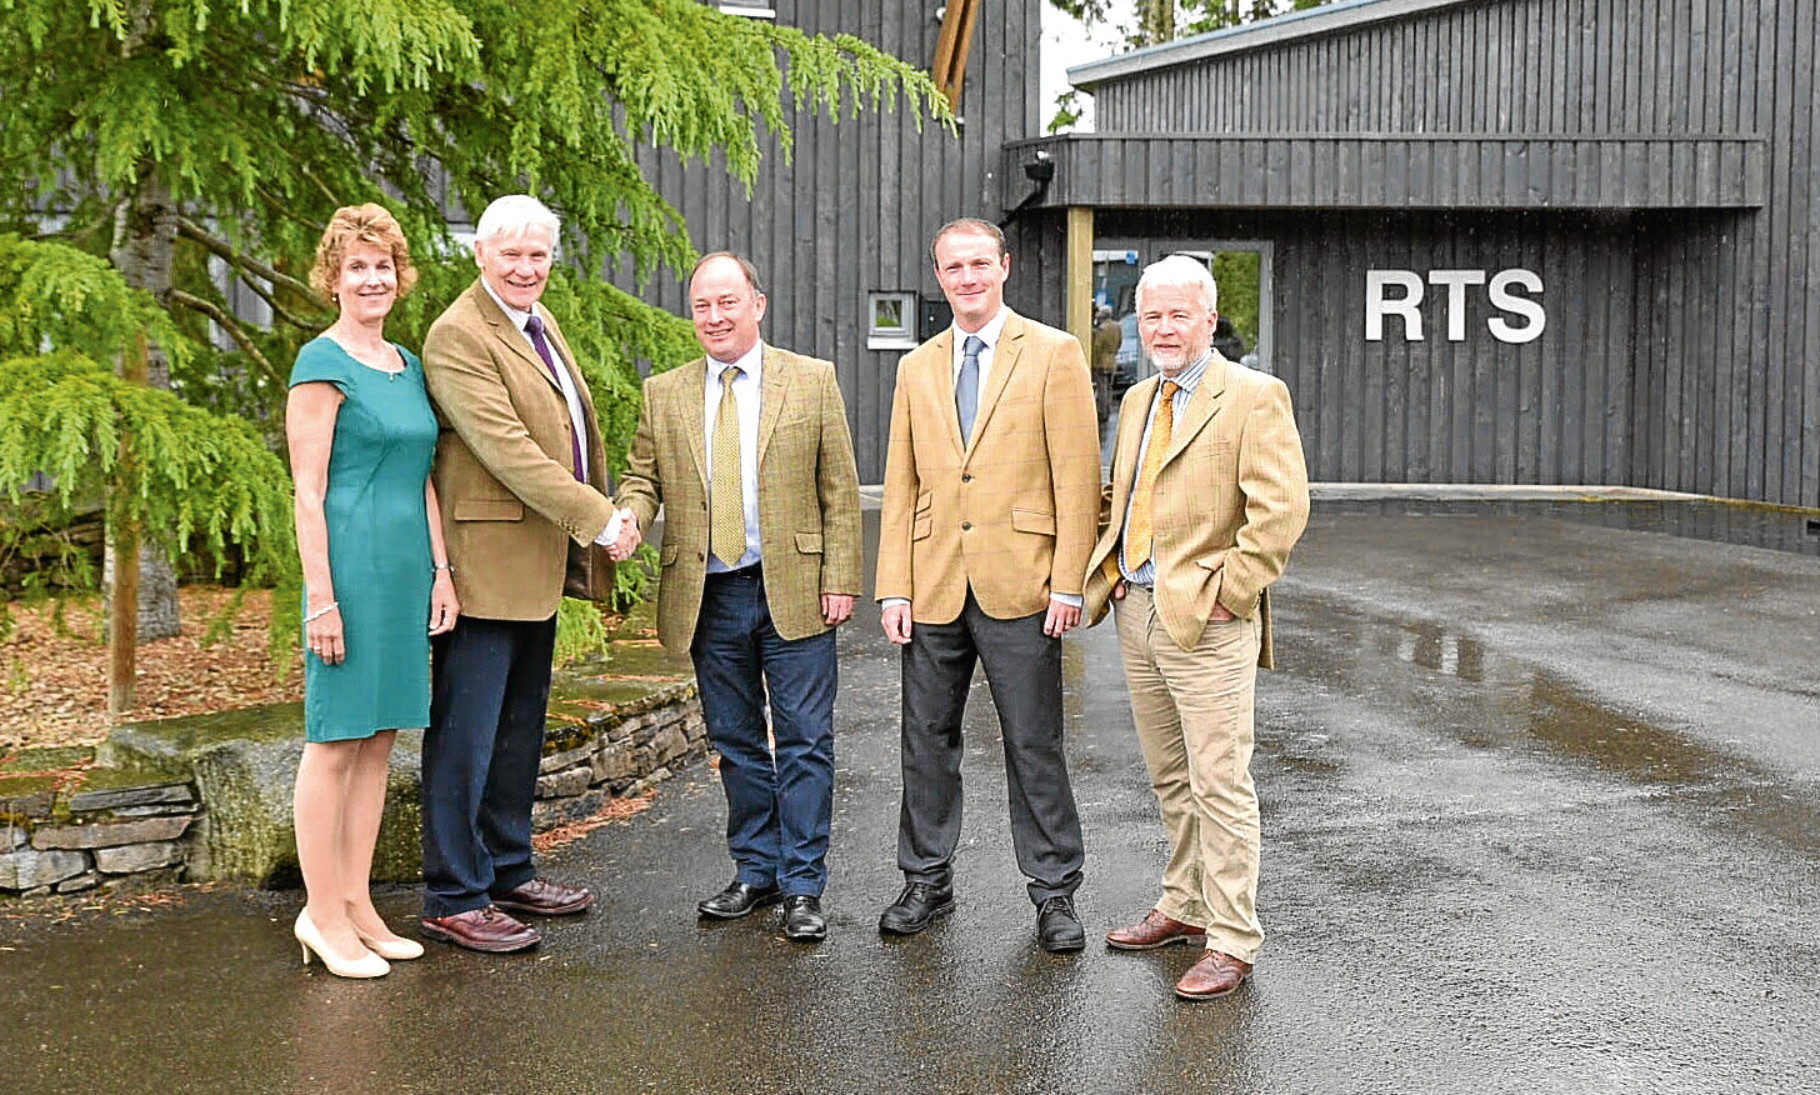 Alan and Heather Robbins hand over to RTS co-directors Norman O'Neill, Ross Kennedy and Harry Wilson.